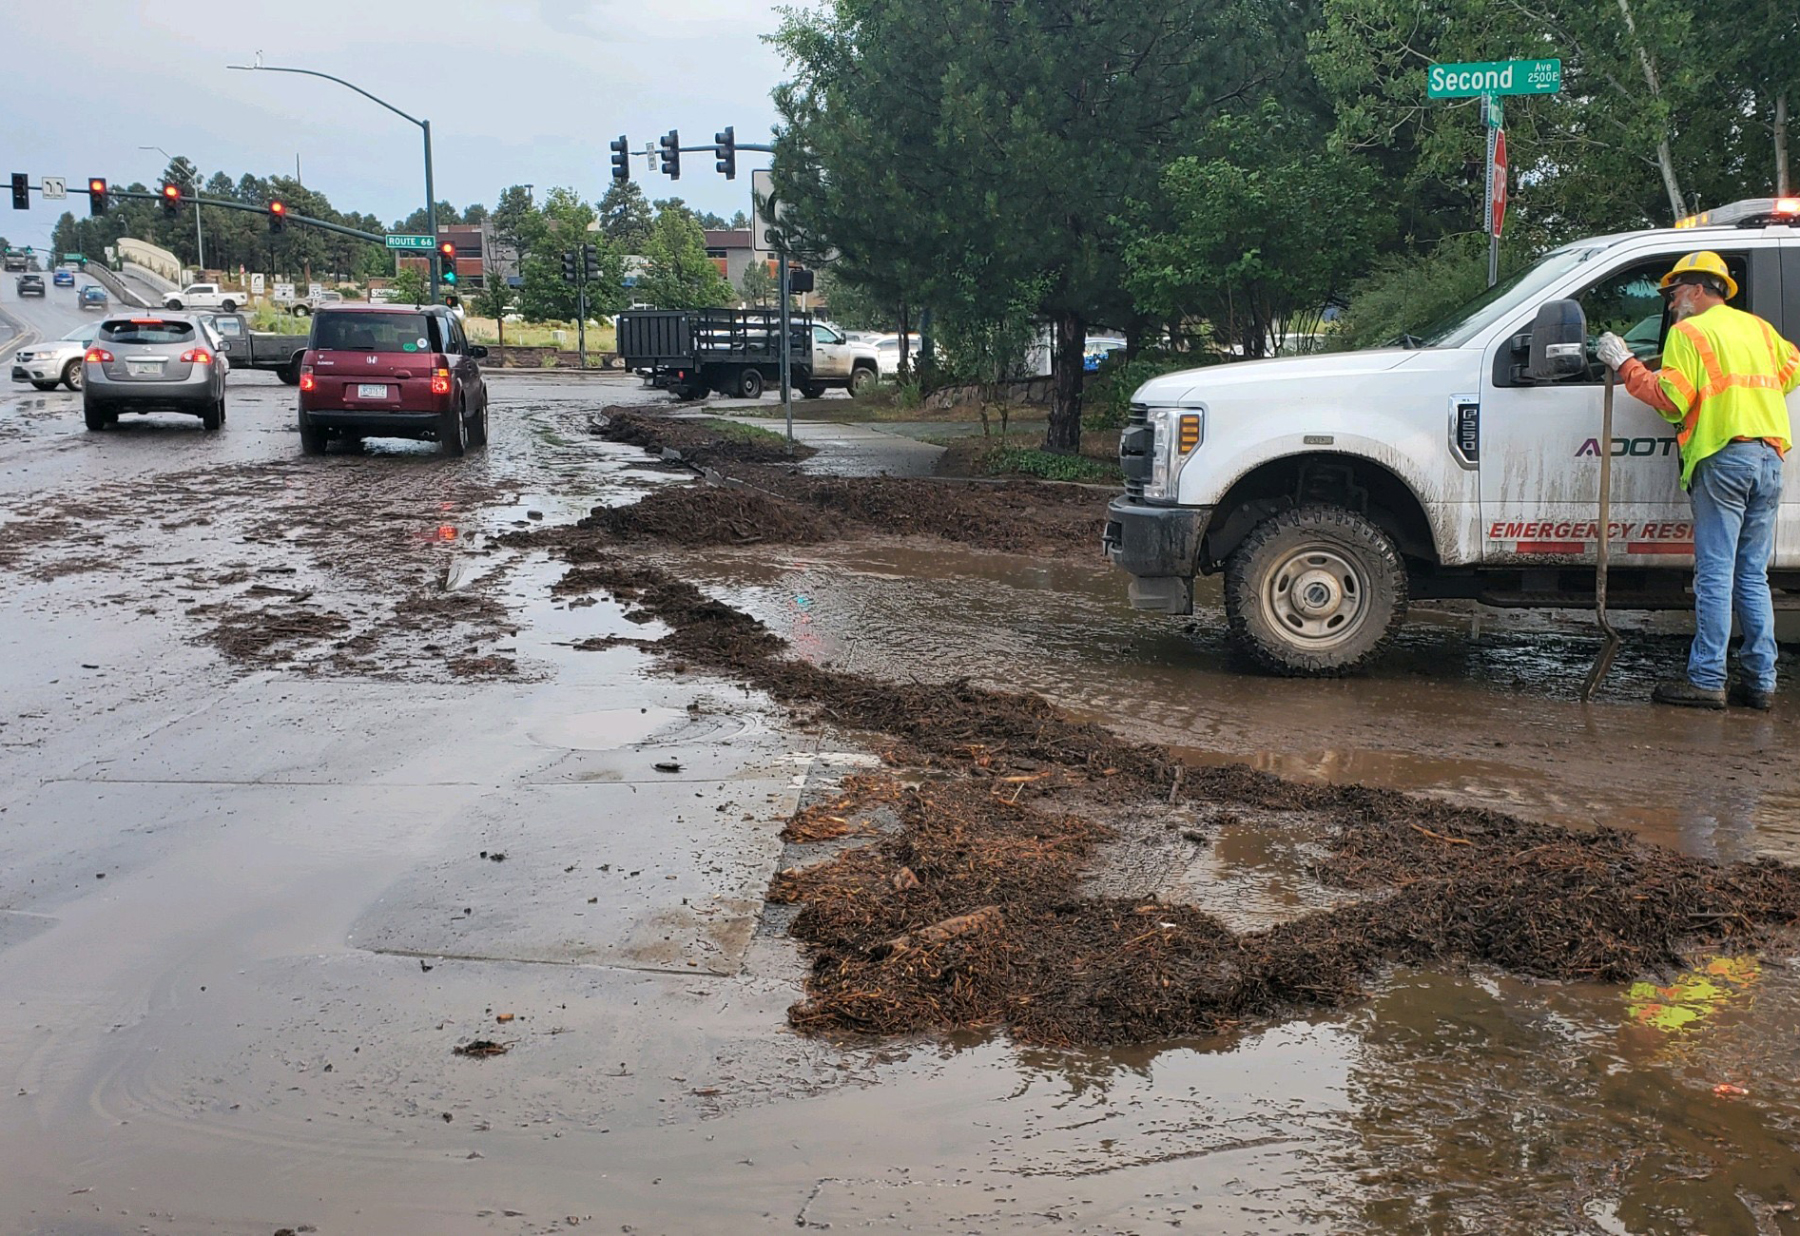 Shelter in place order issued for flood areas of Flagstaff Navajo